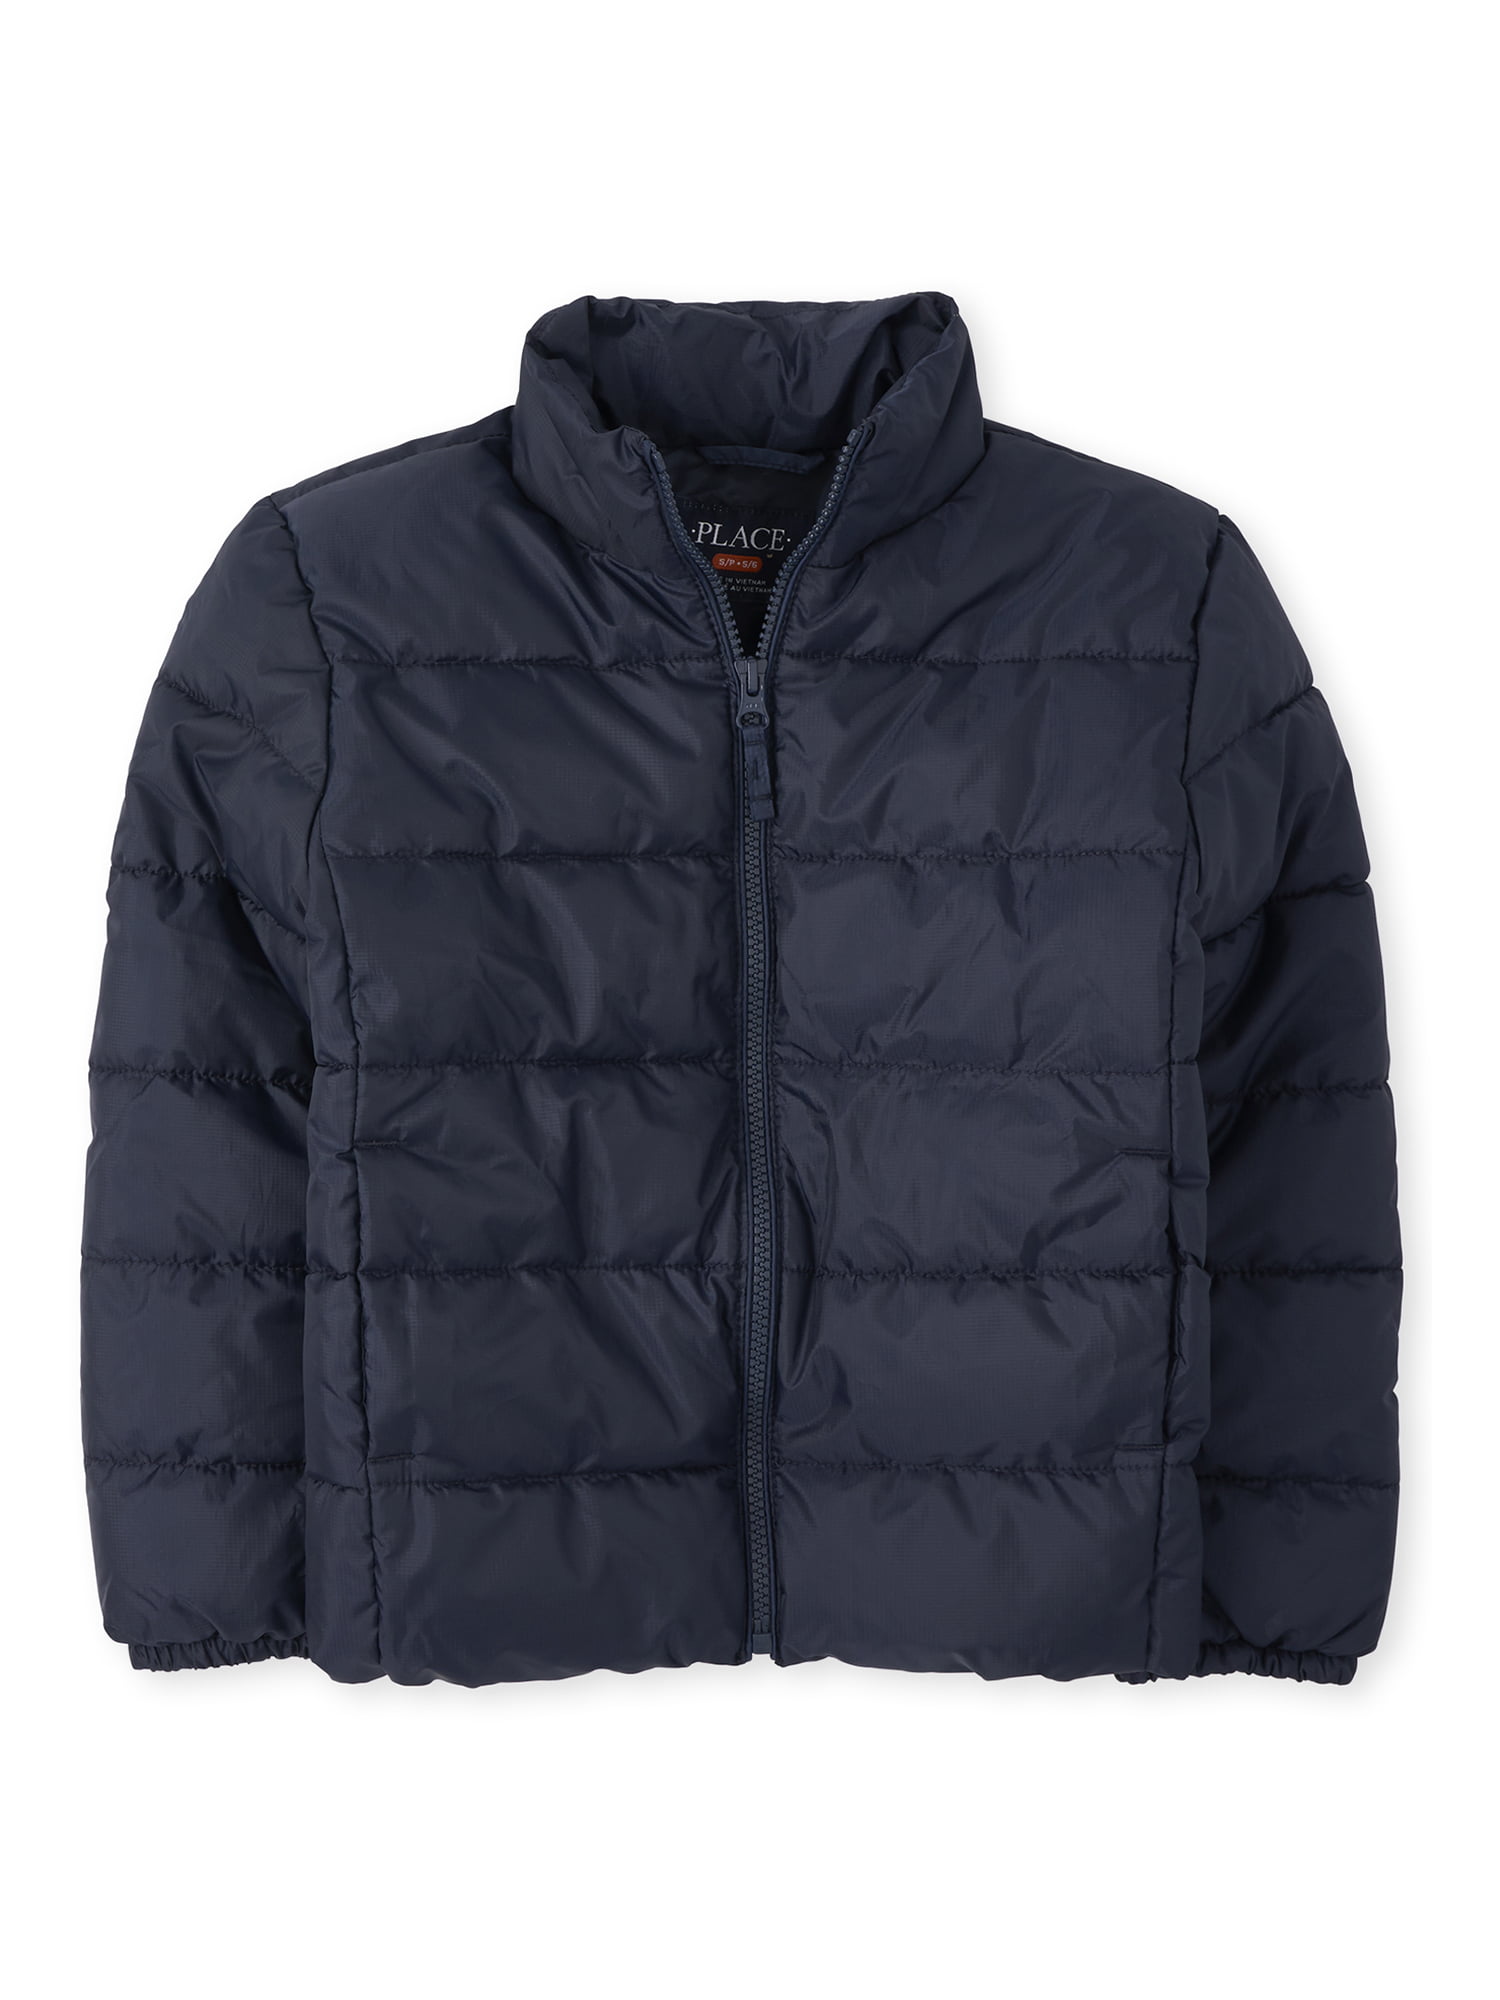 The Childrens Place Boys Puffer Jacket Sizes 7-16 - Walmart.com